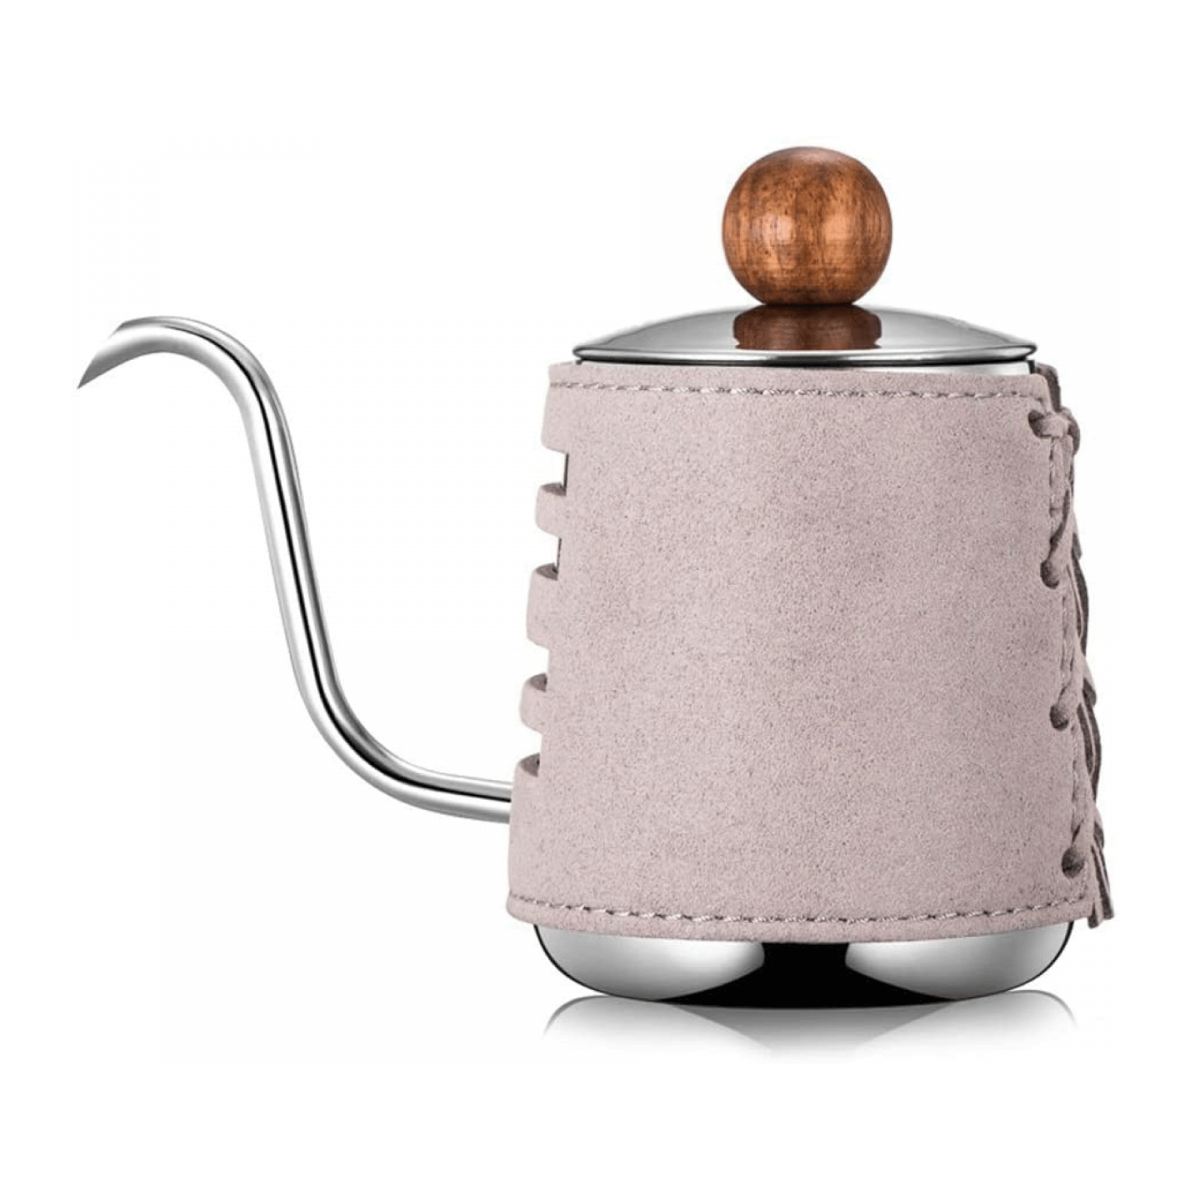 Hand-Free Kettle with Leather Wrapped 550ml